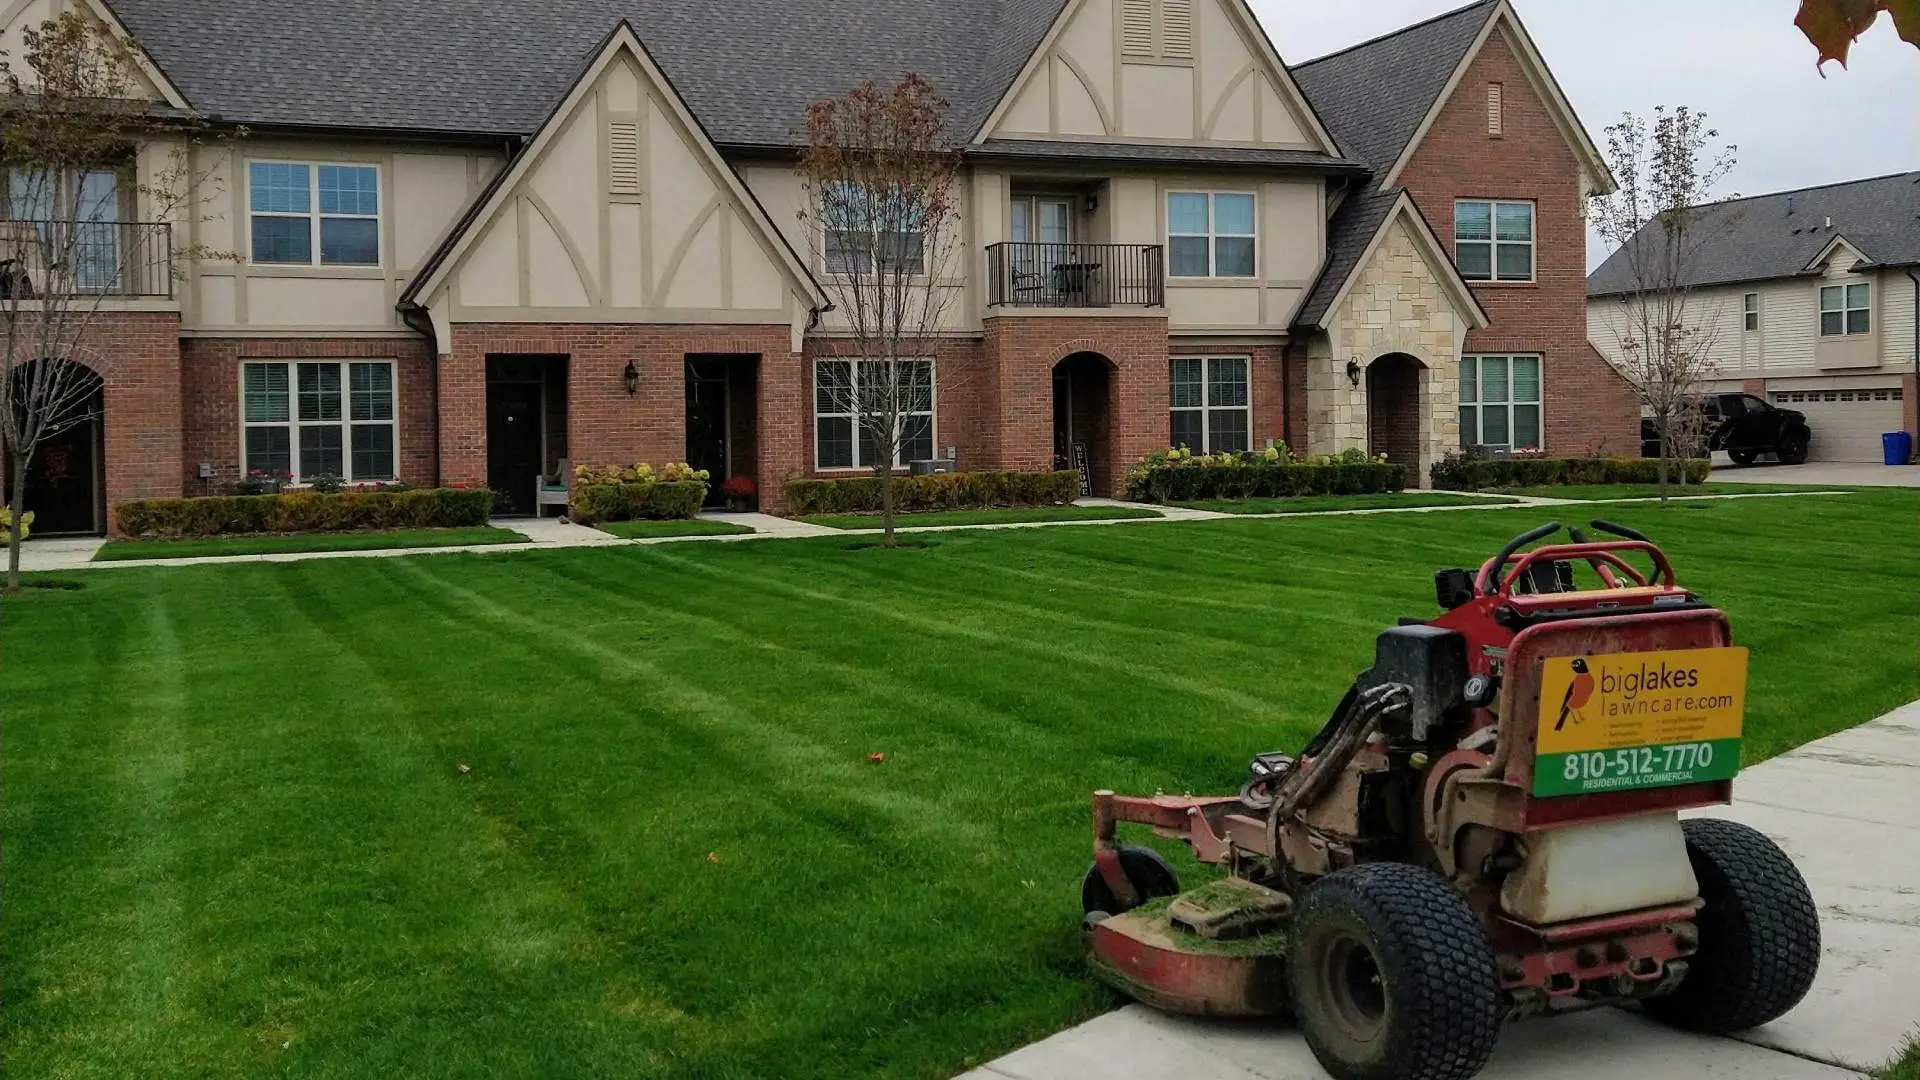 4 Reasons You Should Hire Professionals to Mow Your Lawn